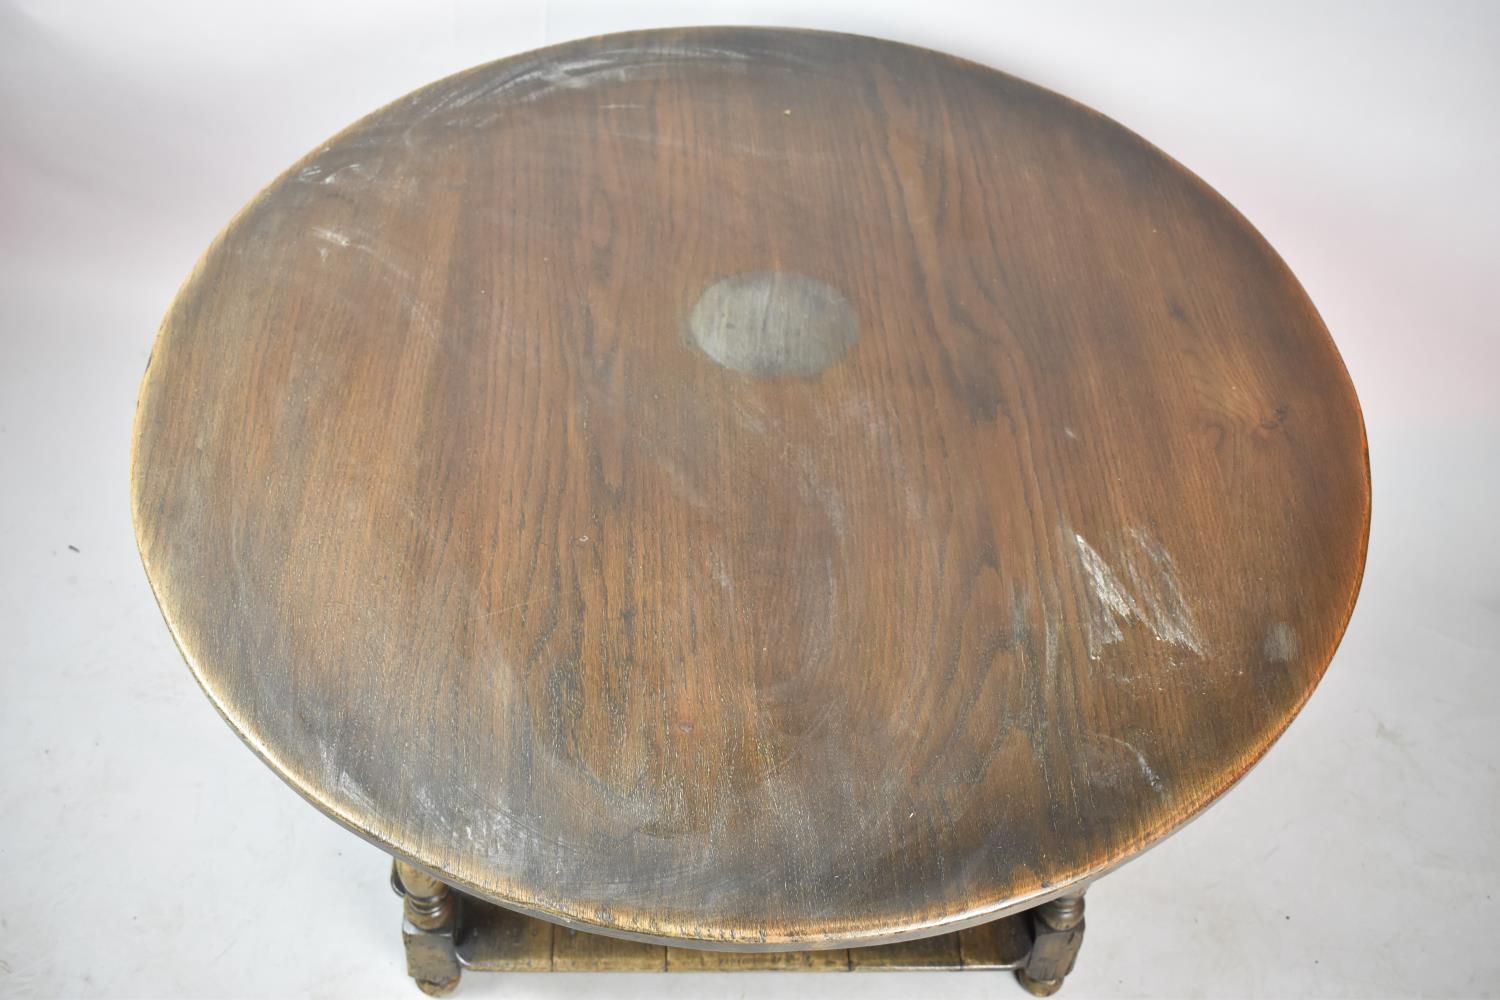 A Mid 20th Century Circular Topped Oak Centre Coffee Table with Square Stretcher Shelf, Water Damage - Image 2 of 2